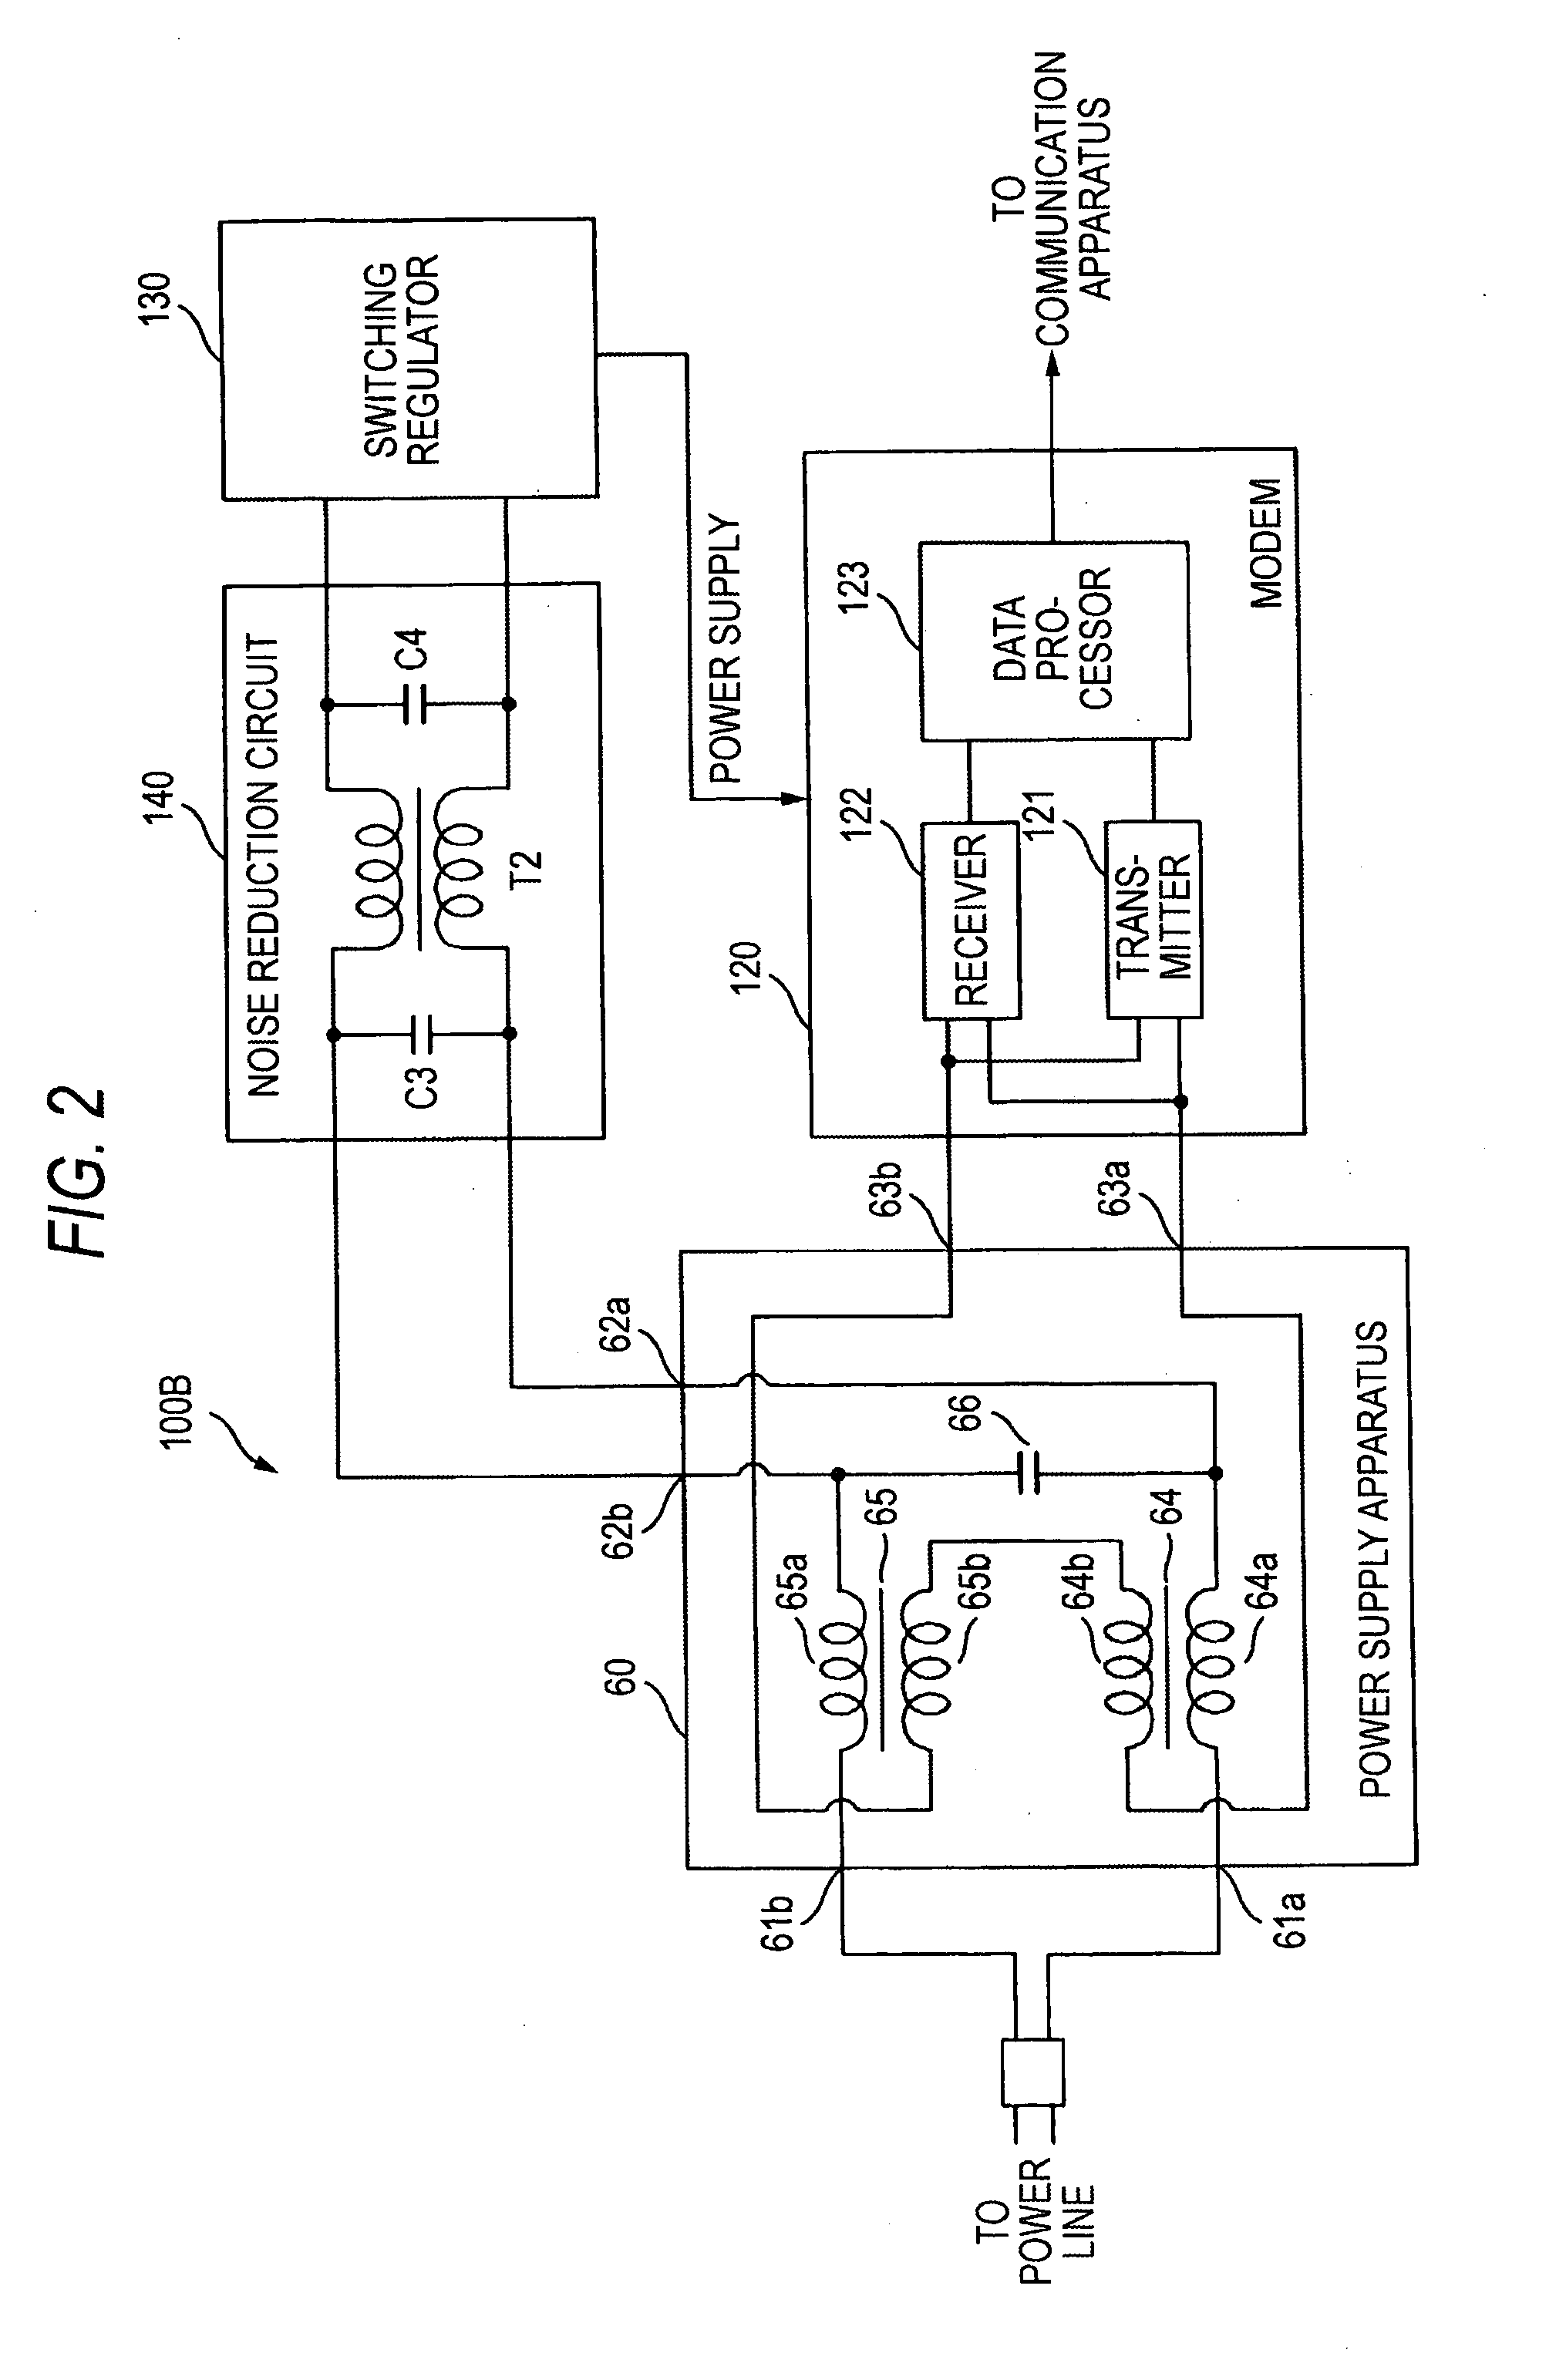 Power supply apparatus and power line communication apparatus